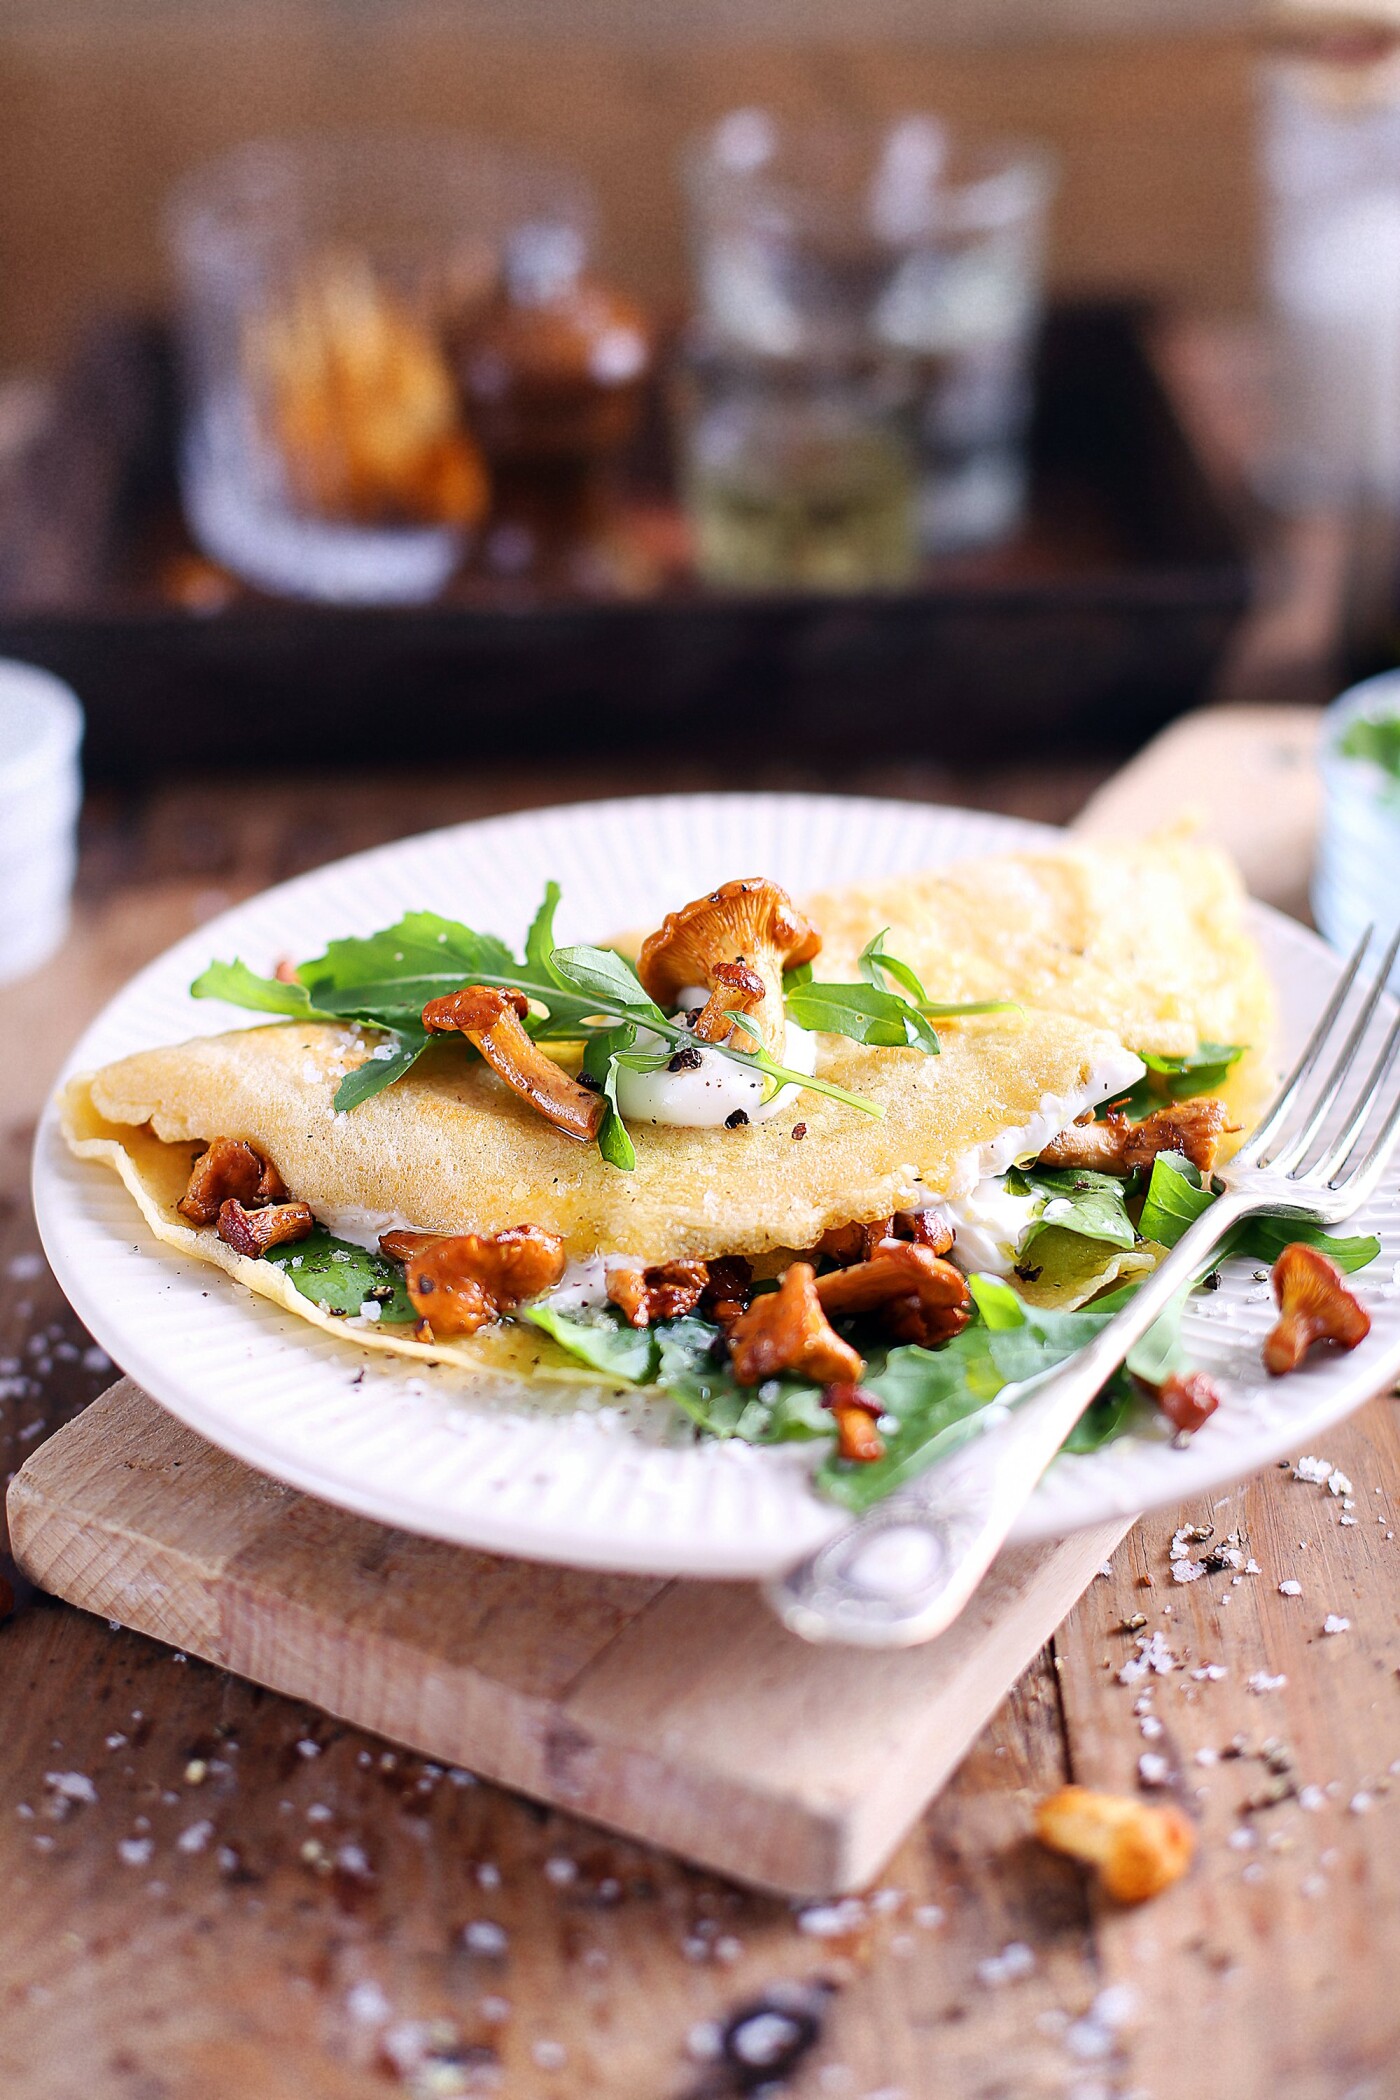 Savory Mushroom, Arugula And Cheese Crepes - a part of the cookbook photo shoot.